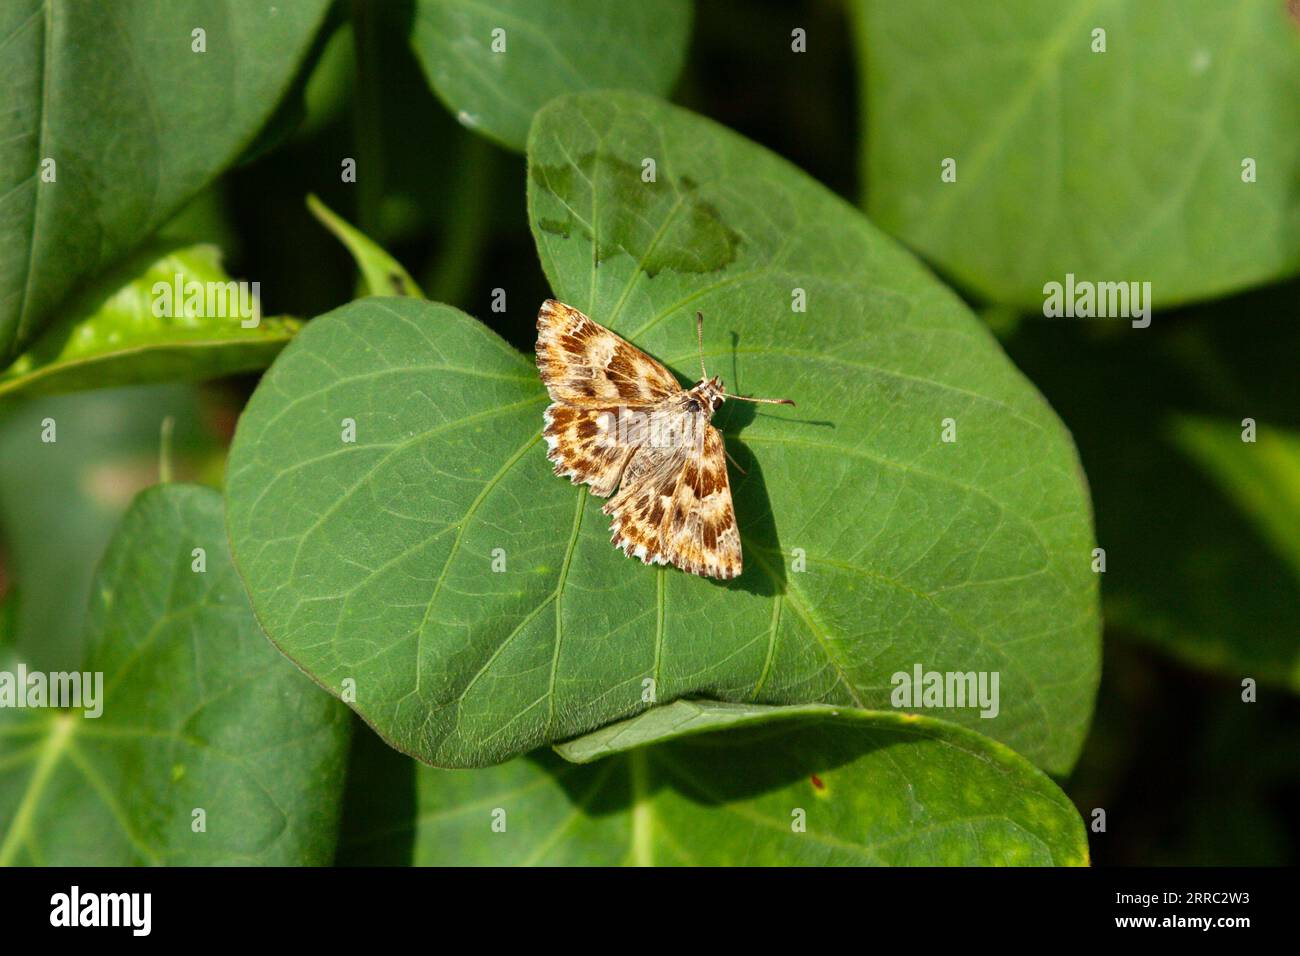 Brown spotted a butterfly on a green leaf. The butterfly of the species Carcharodus alceae or Mallow Skipper. Stock Photo